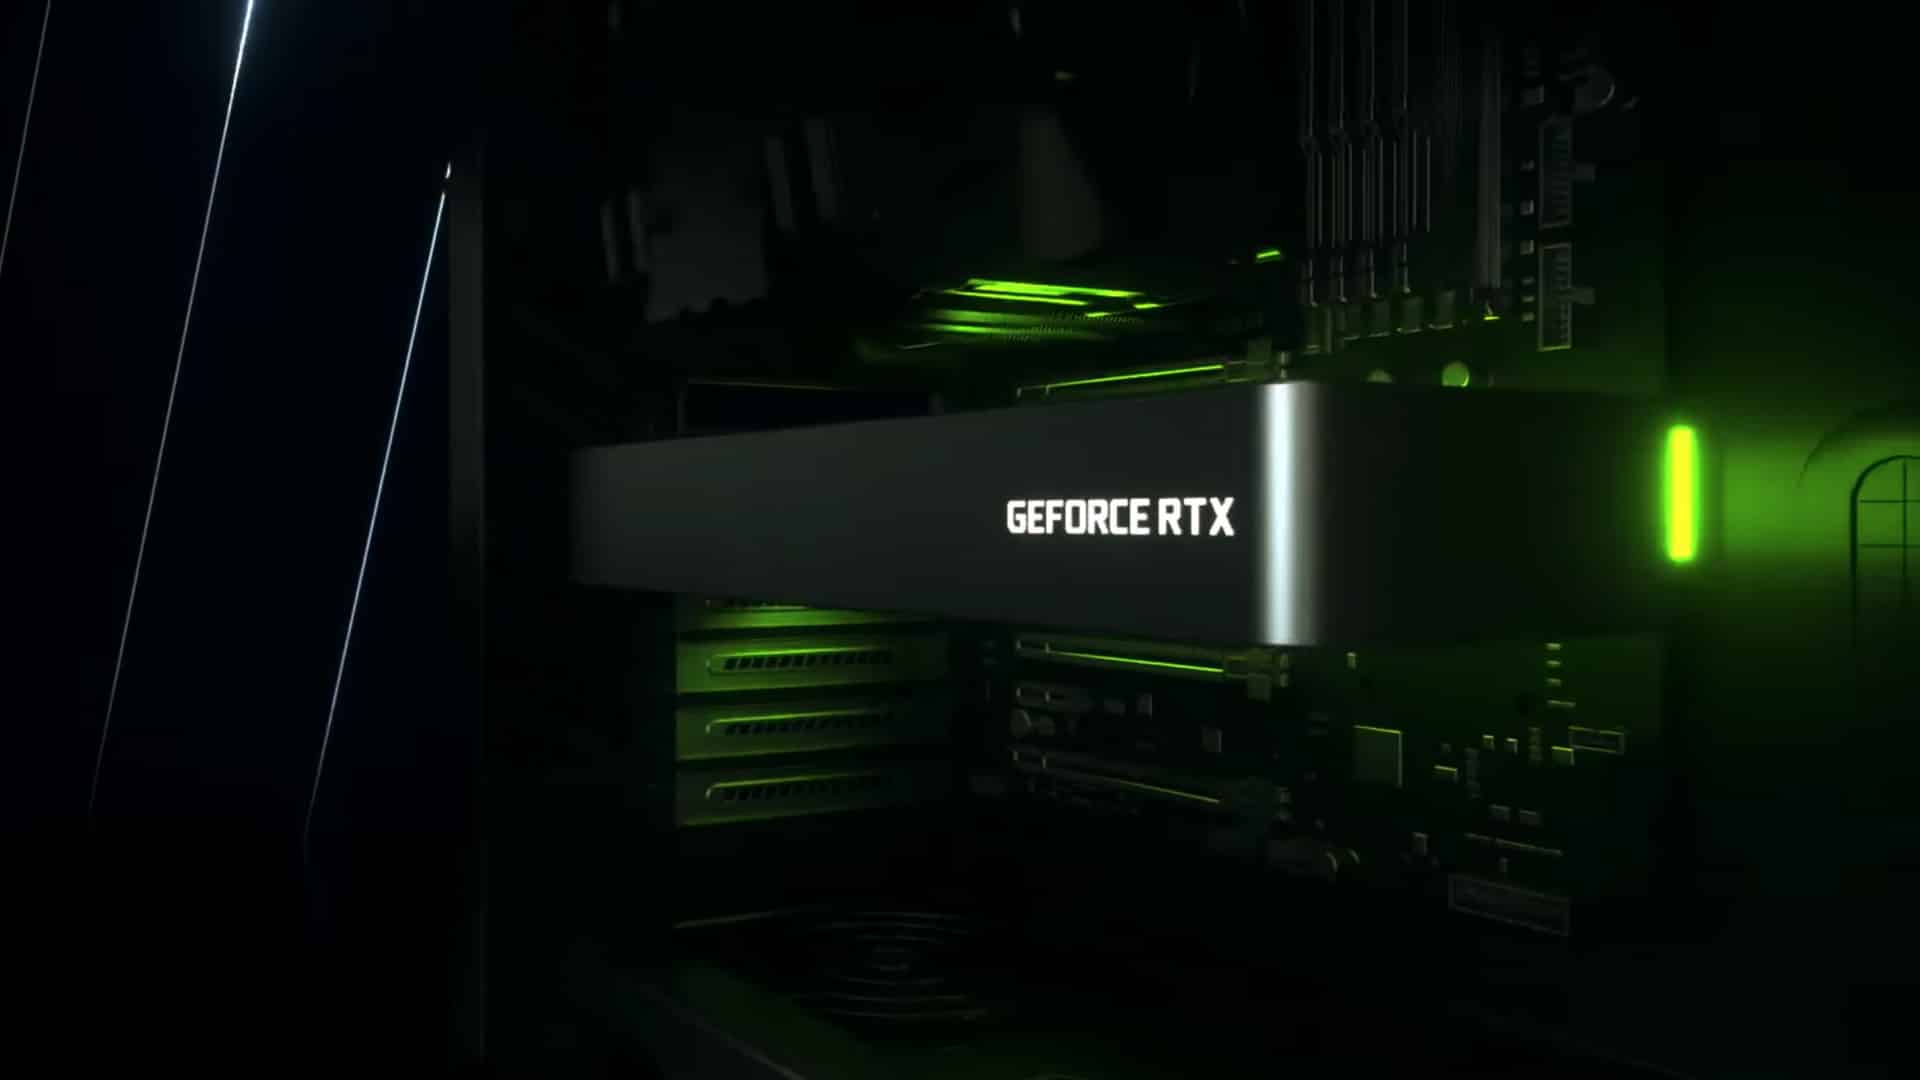 NVIDIA Introduces GeForce RTX 3060, Next Generation of the World's Most Popular GPU